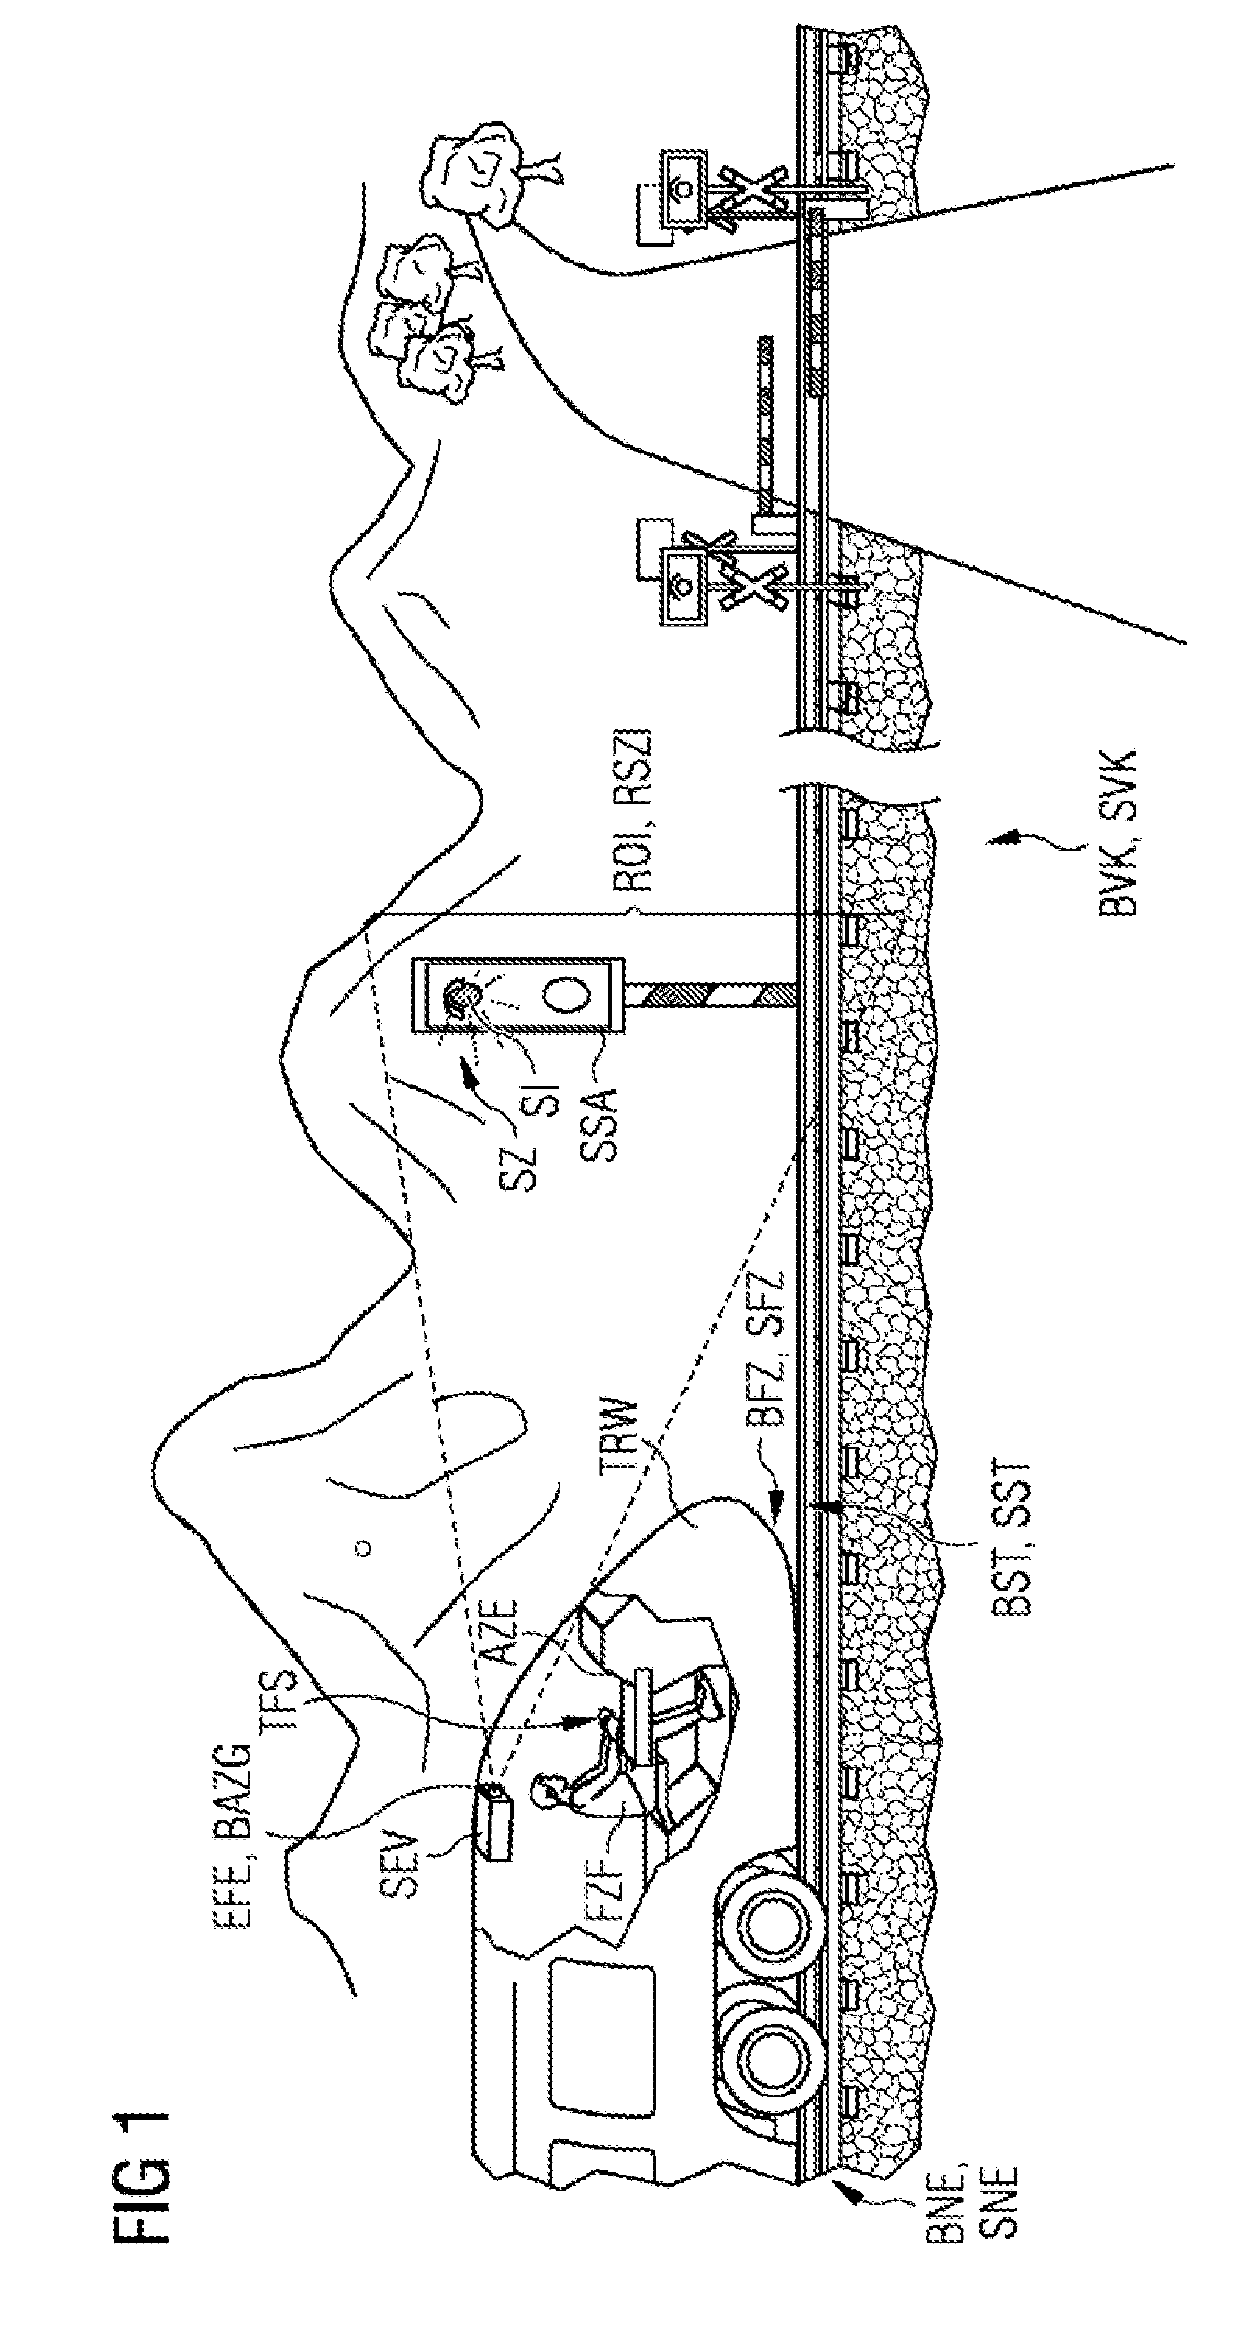 Method, apparatus and railroad vehicle, in particular rail vehicle, for signal recognition in railroad traffic, in particular rail traffic